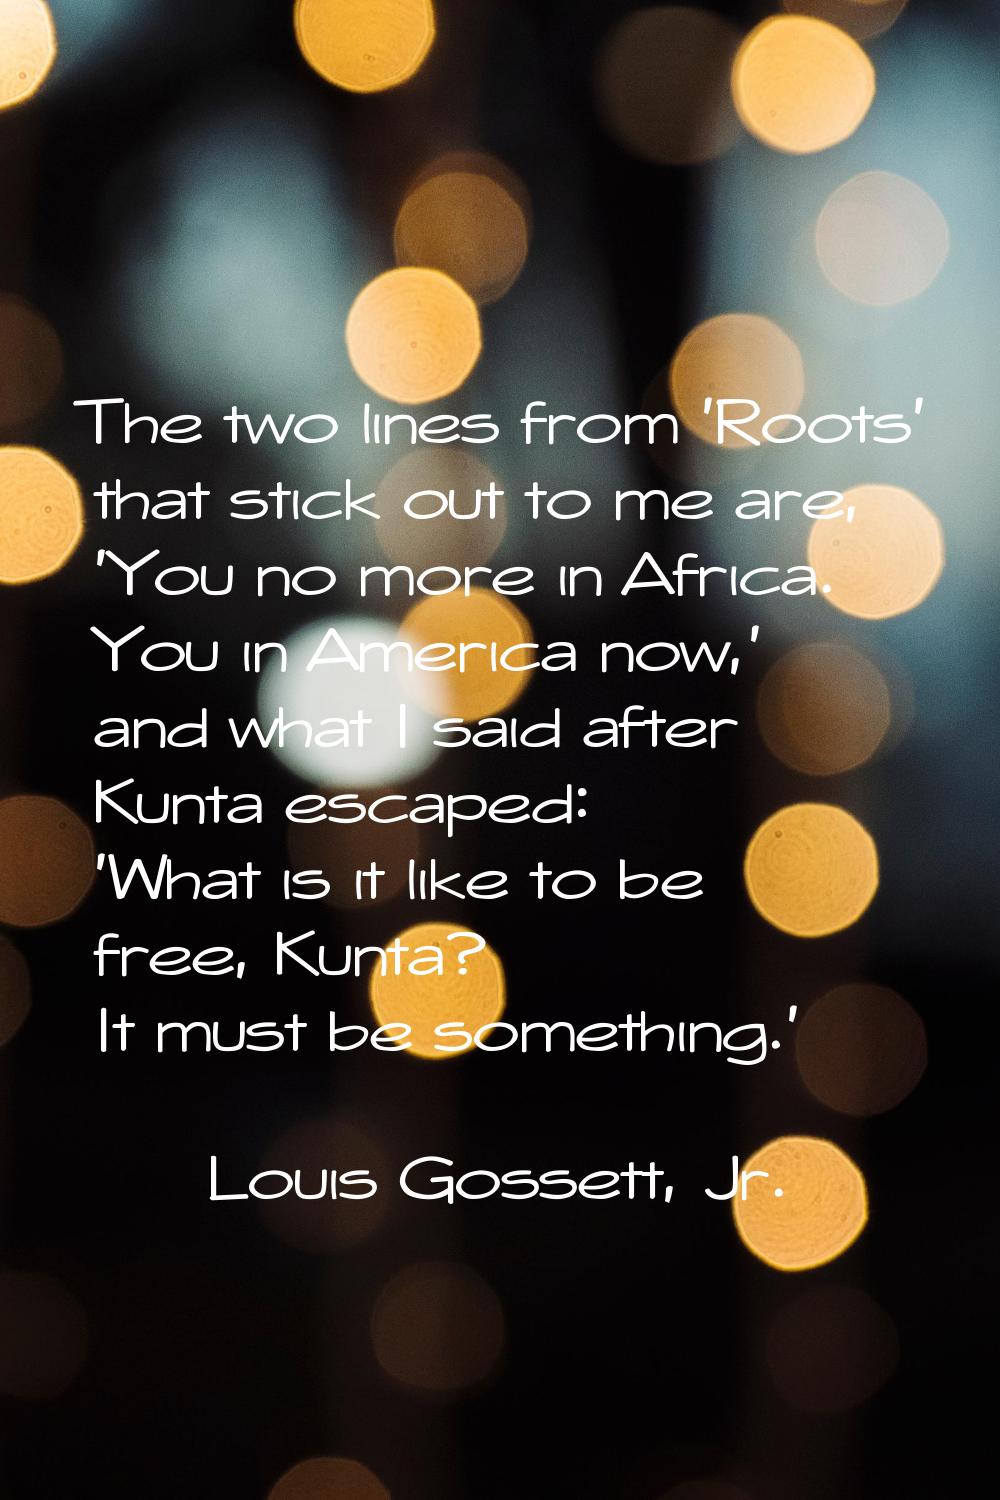 The two lines from 'Roots' that stick out to me are, 'You no more in Africa. You in America now,' a